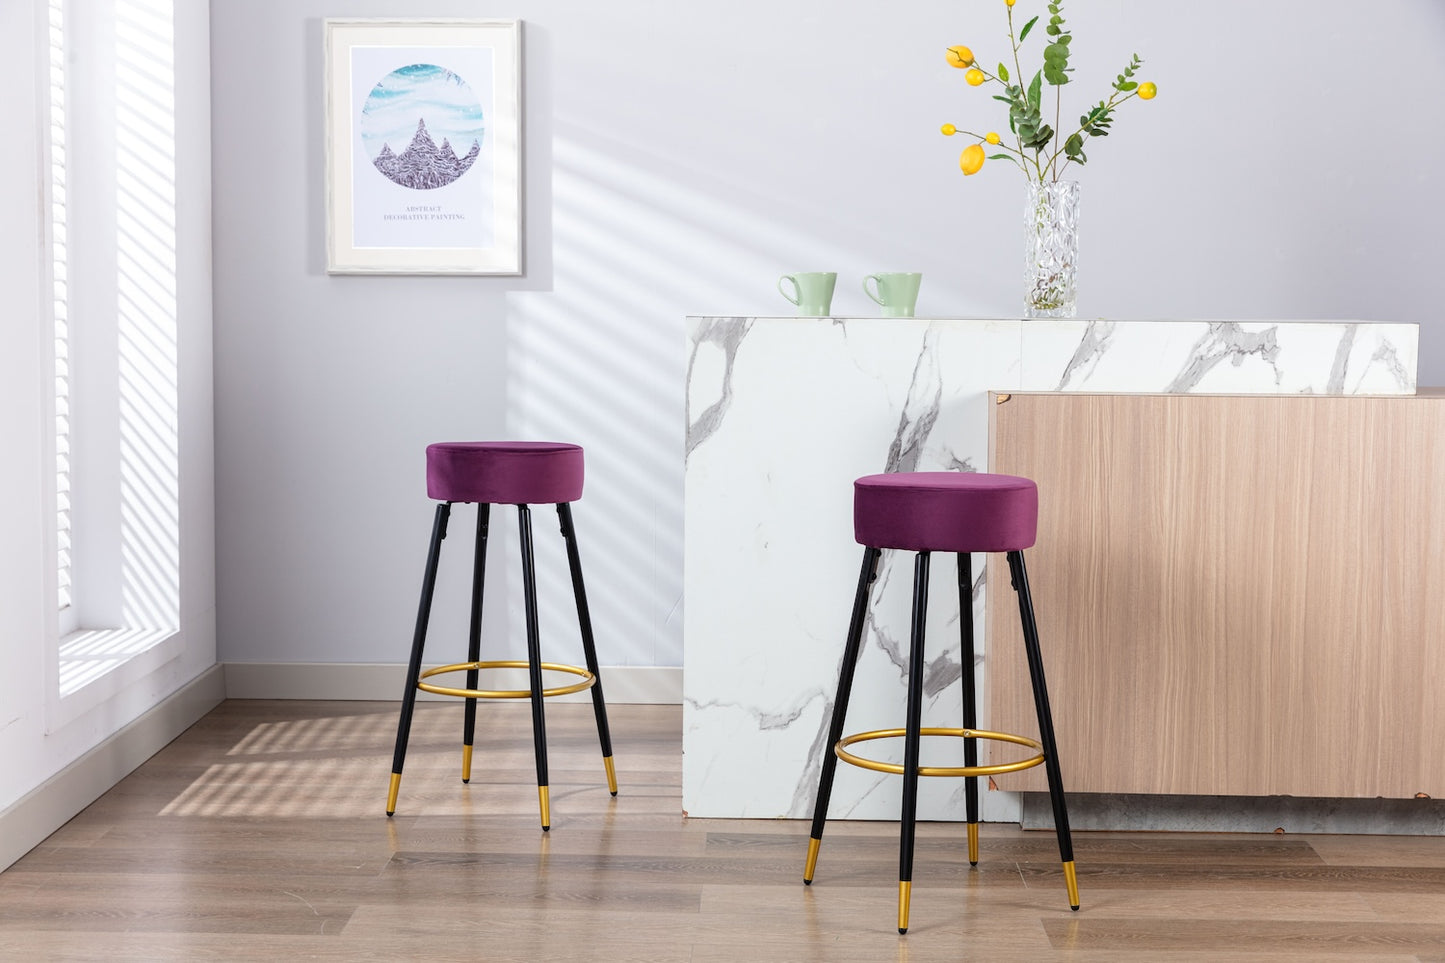 Knef 24" Counter Height Bar Stool with Velvet Seat Set of 2 - Purple